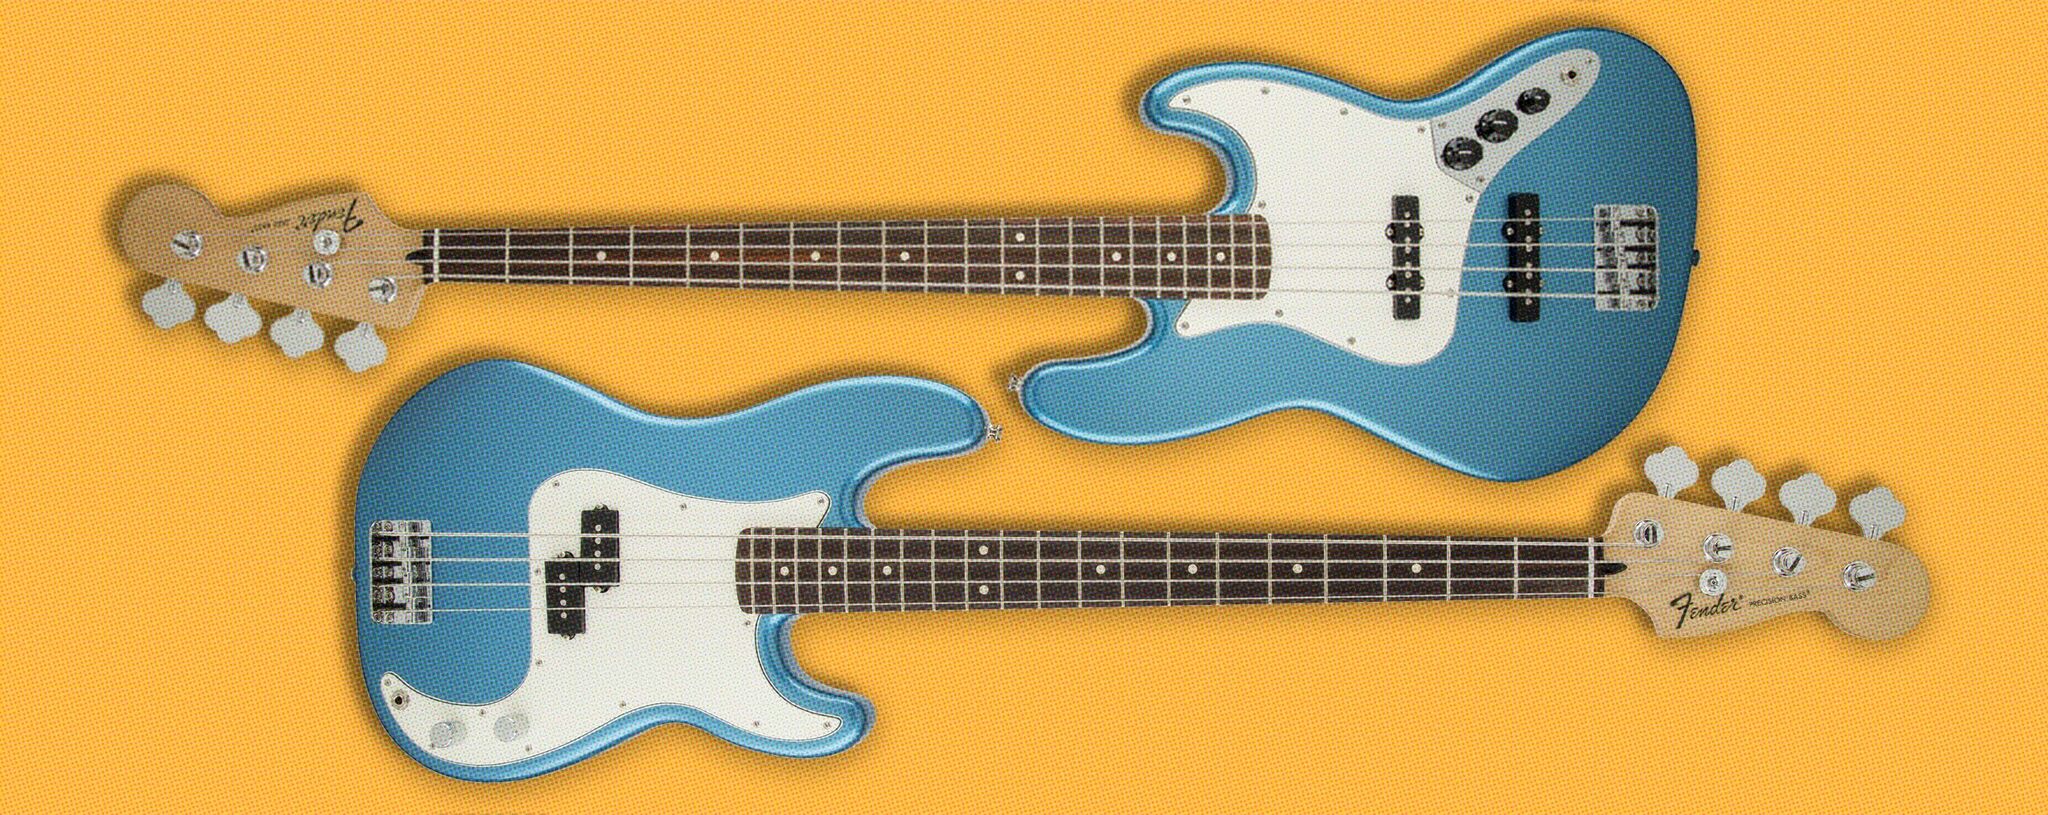 Precision Bass or Jazz Bass: Which Is Right for You? | Fender Basses